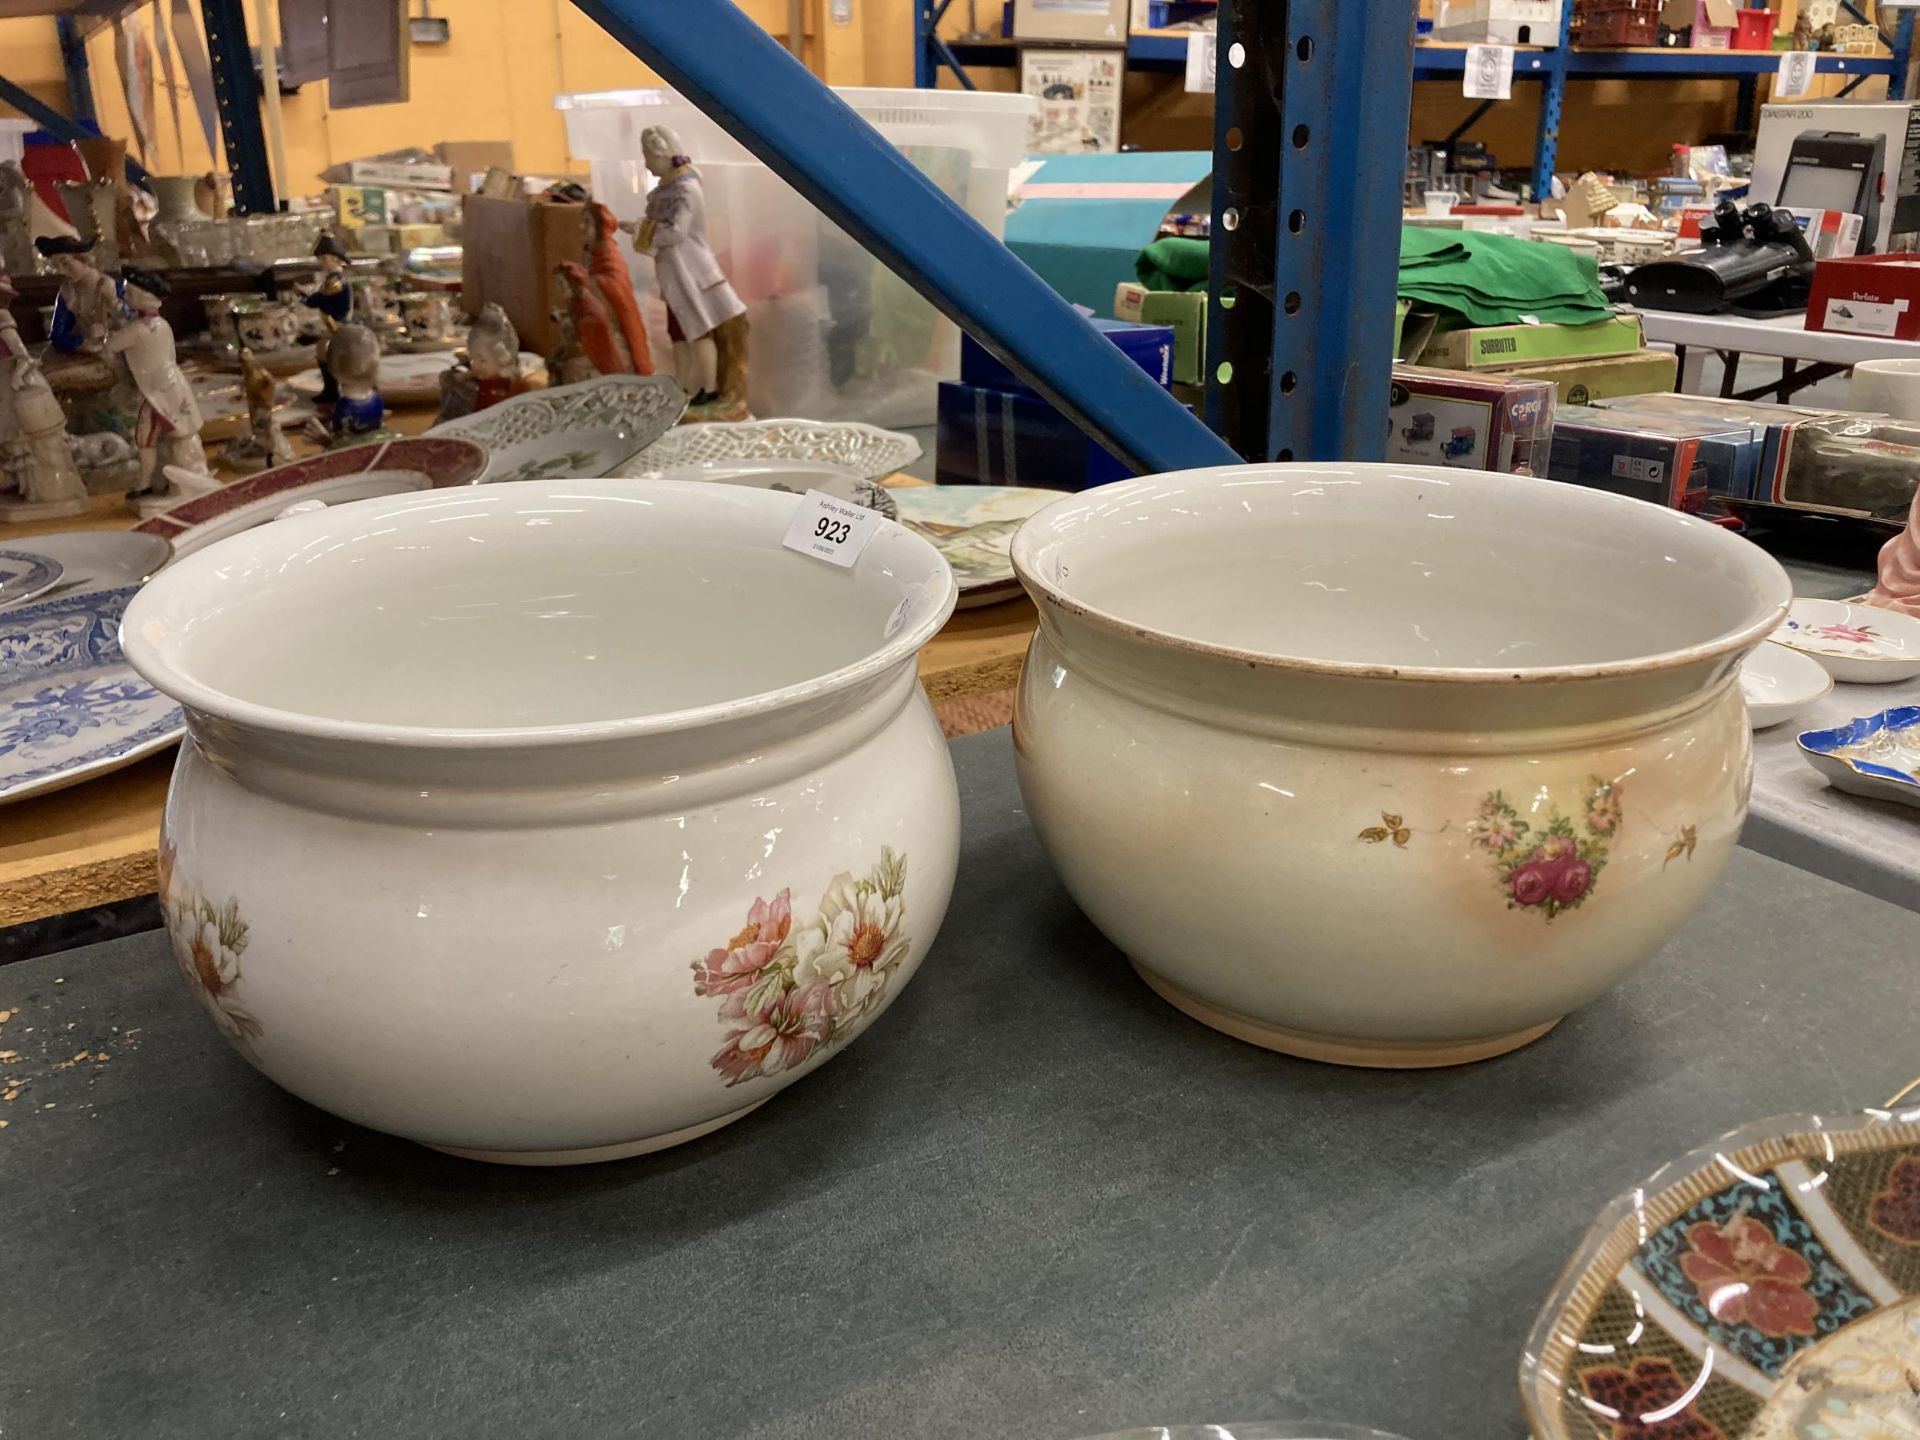 TWO VINTAGE FLORAL PATTERNED CHAMBER POTS